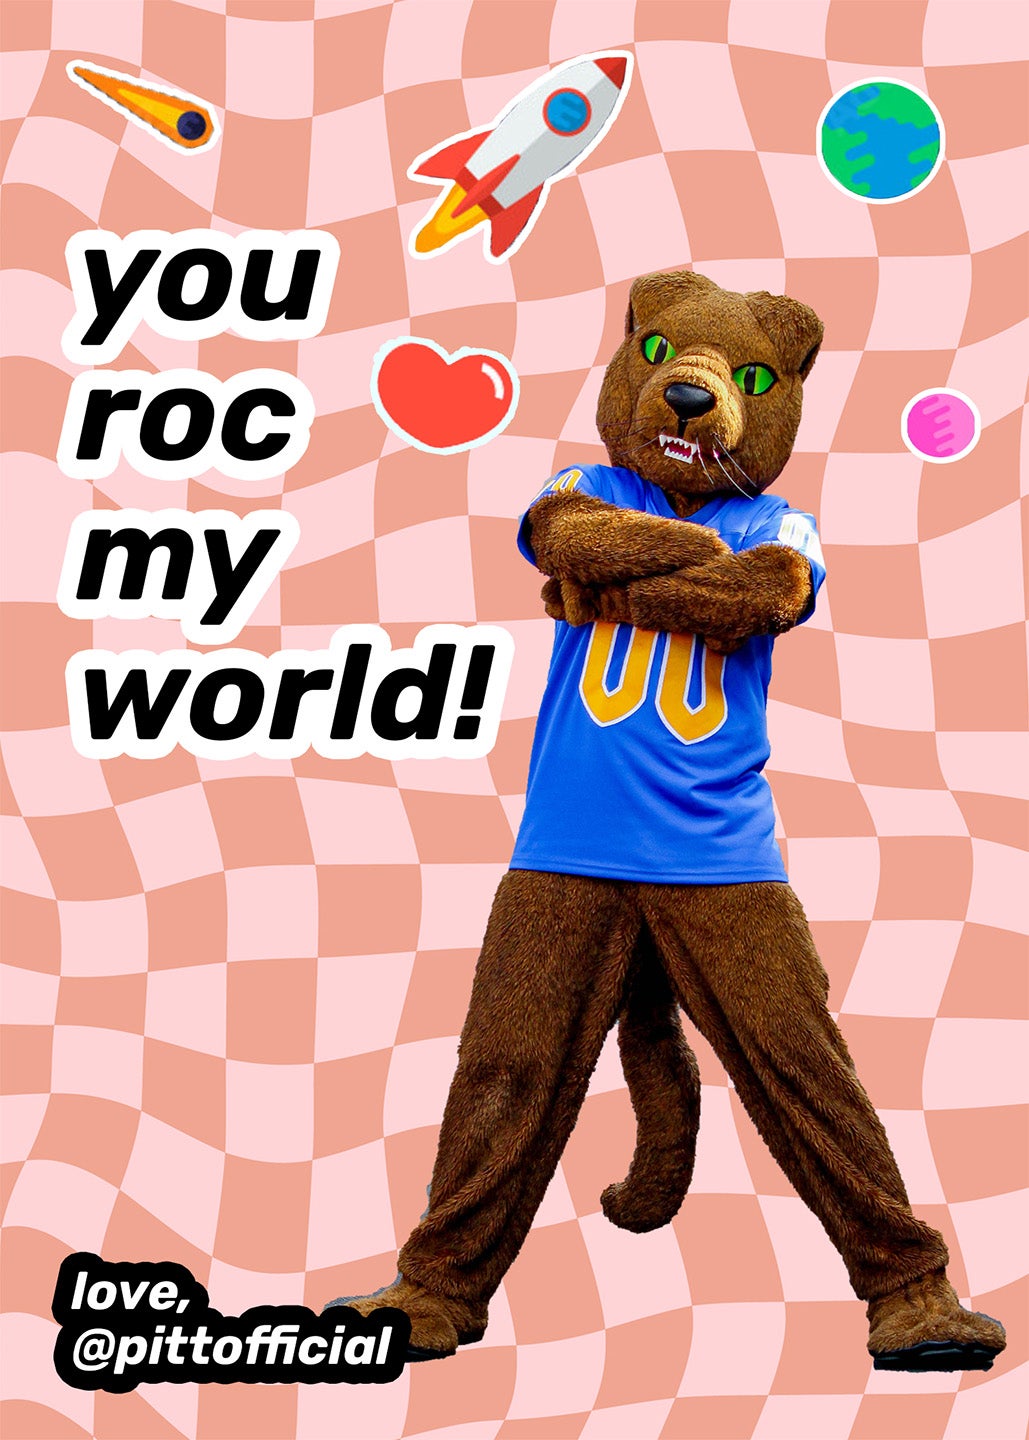 Roc the Panther against a pink background with an illustrated heart, rocketship and planets. Caption: you Roc my world!